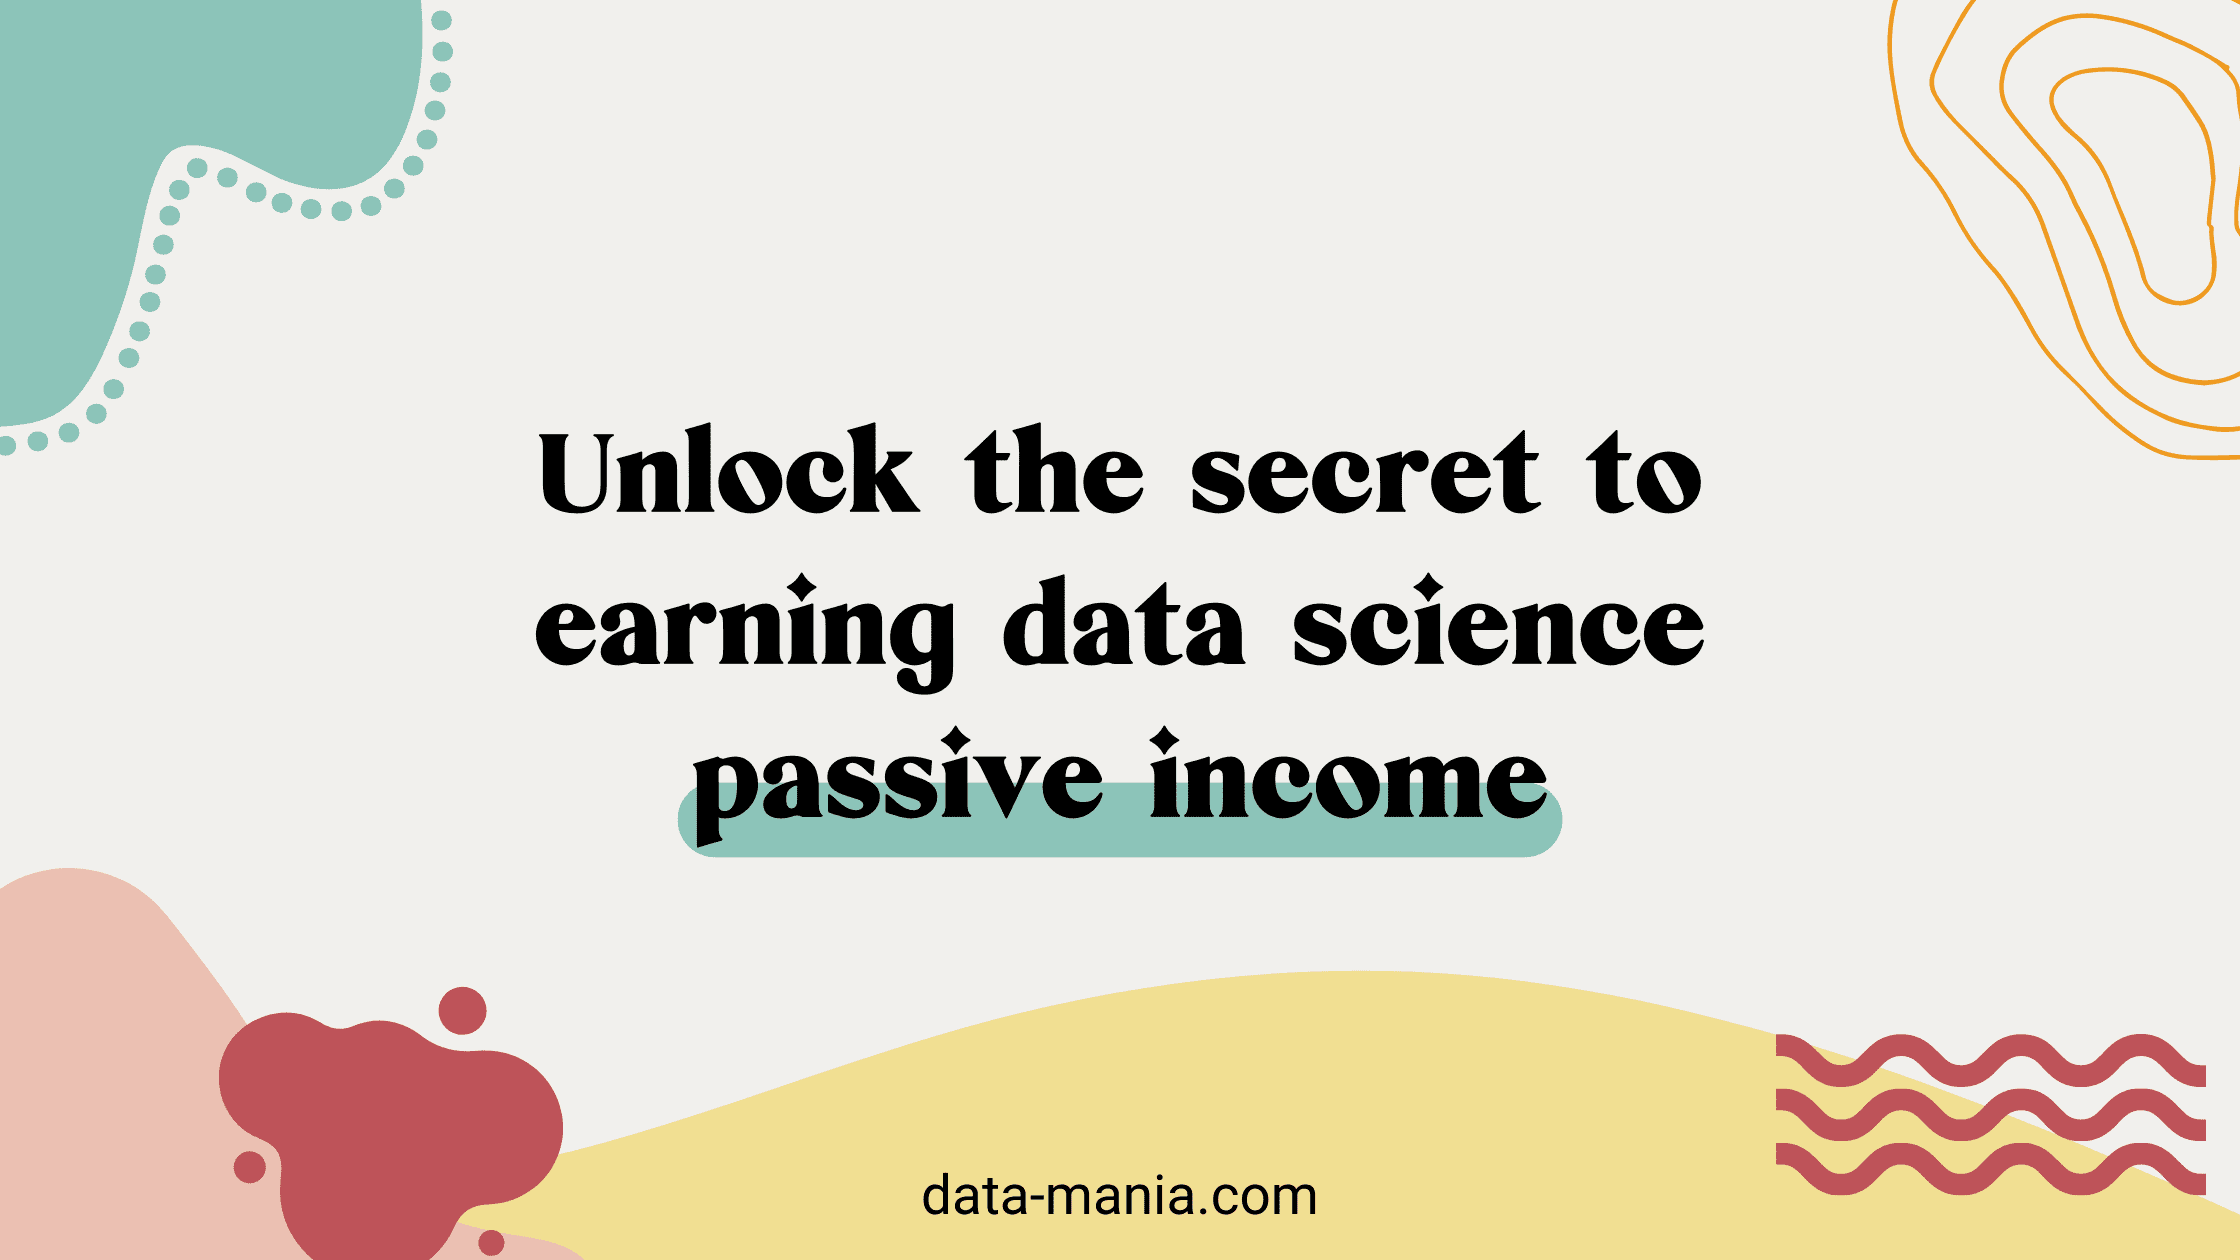 Unlock the secret to earning data science passive income